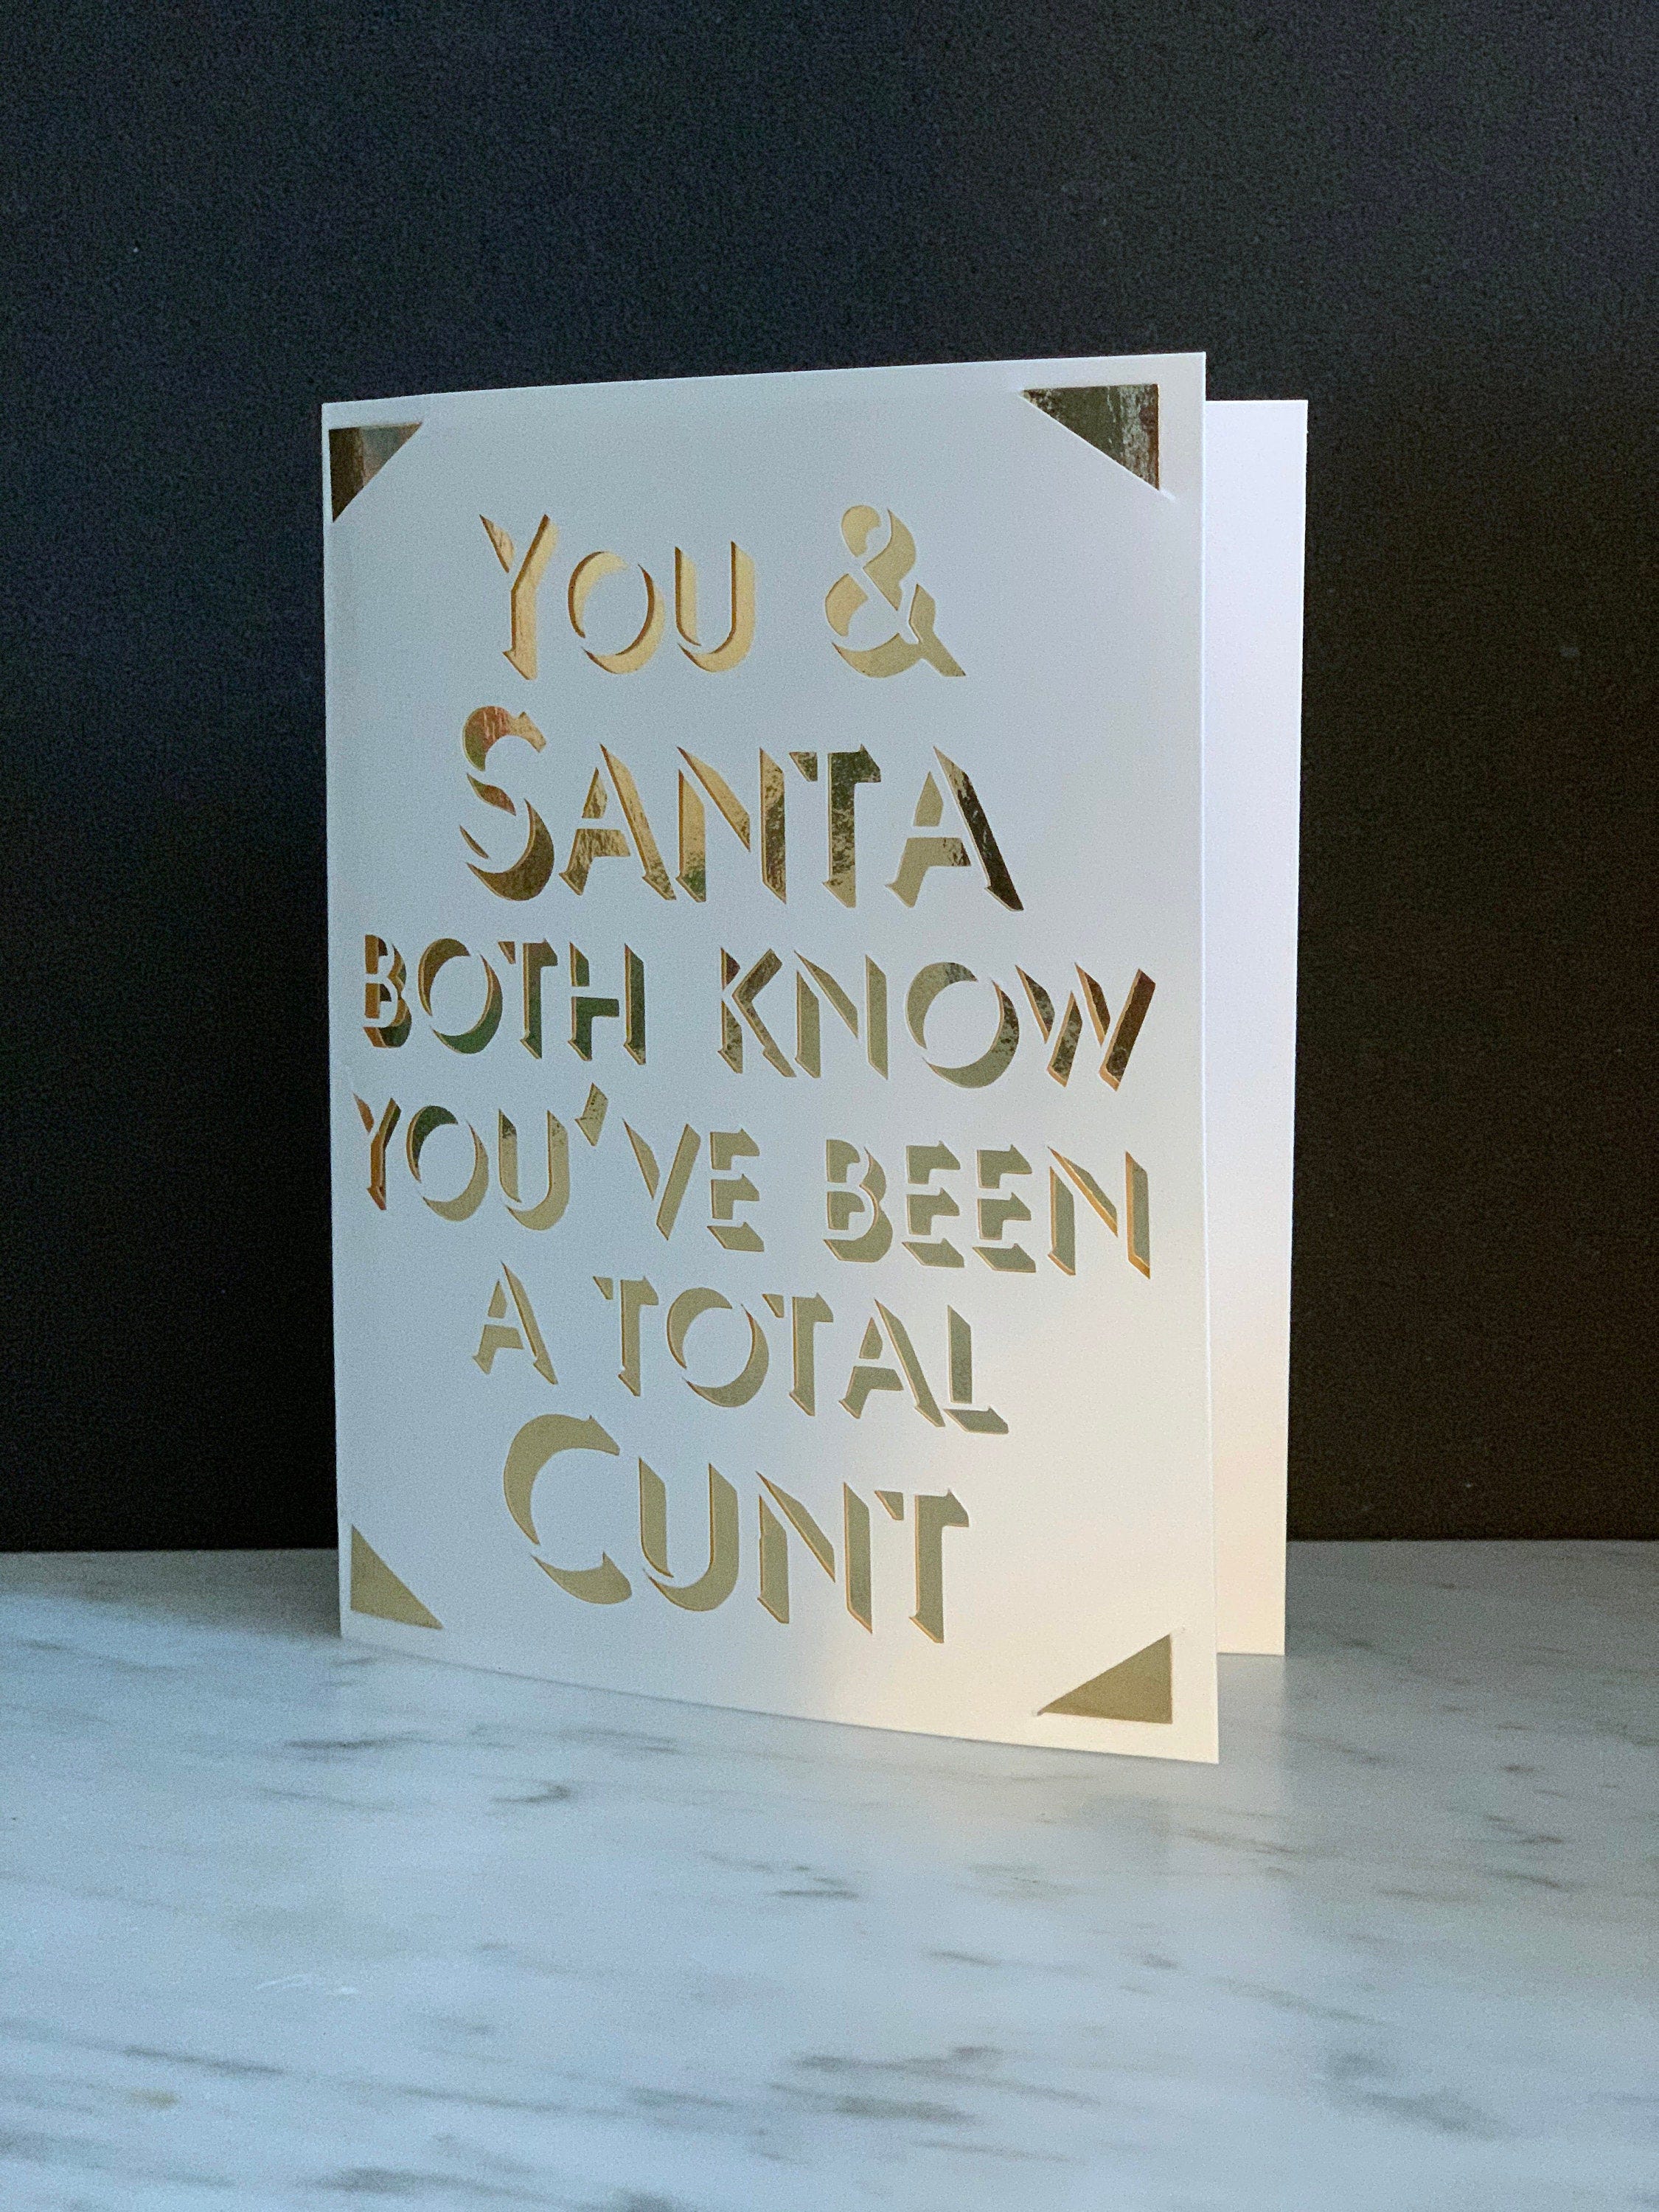 Christmas Card Cut File "You and Santa both know you